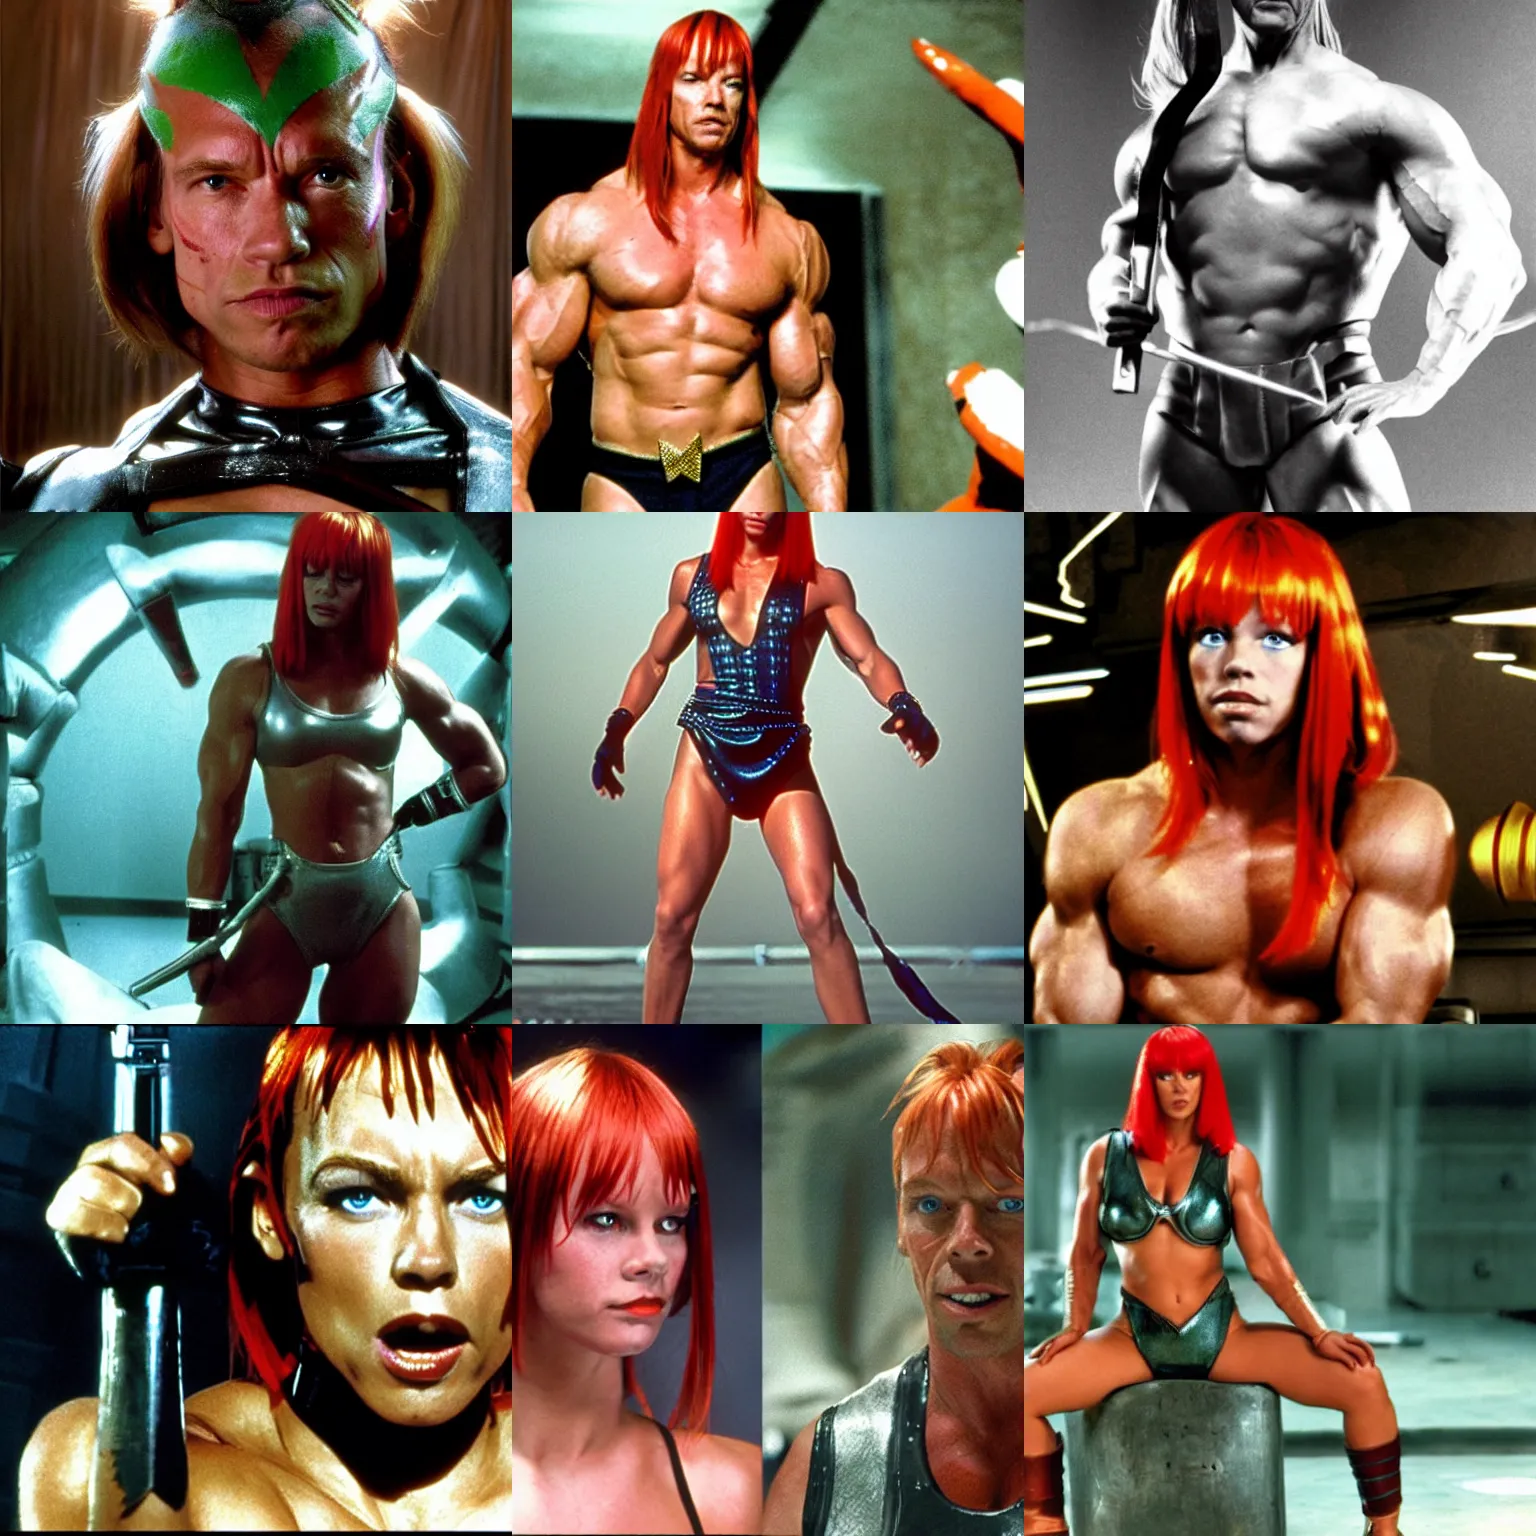 Prompt: a photo of arnold schwarzenegger as Leeloo from The Fifth Element